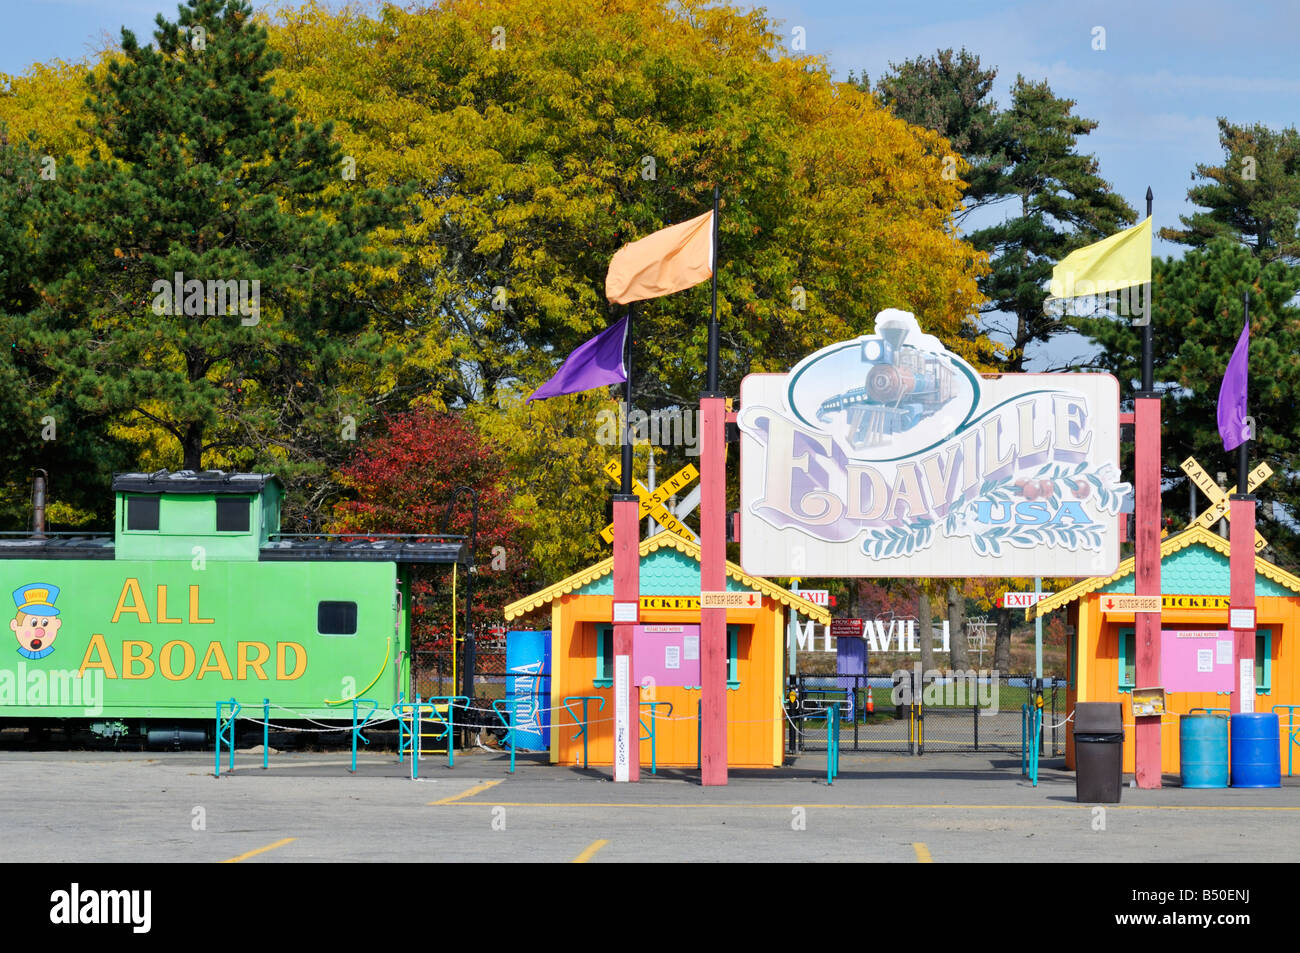 Signs, flags and bright, colorful ticket booths at entrance to Edaville Railroad in Carver, Plymouth County, MA, USA Stock Photo